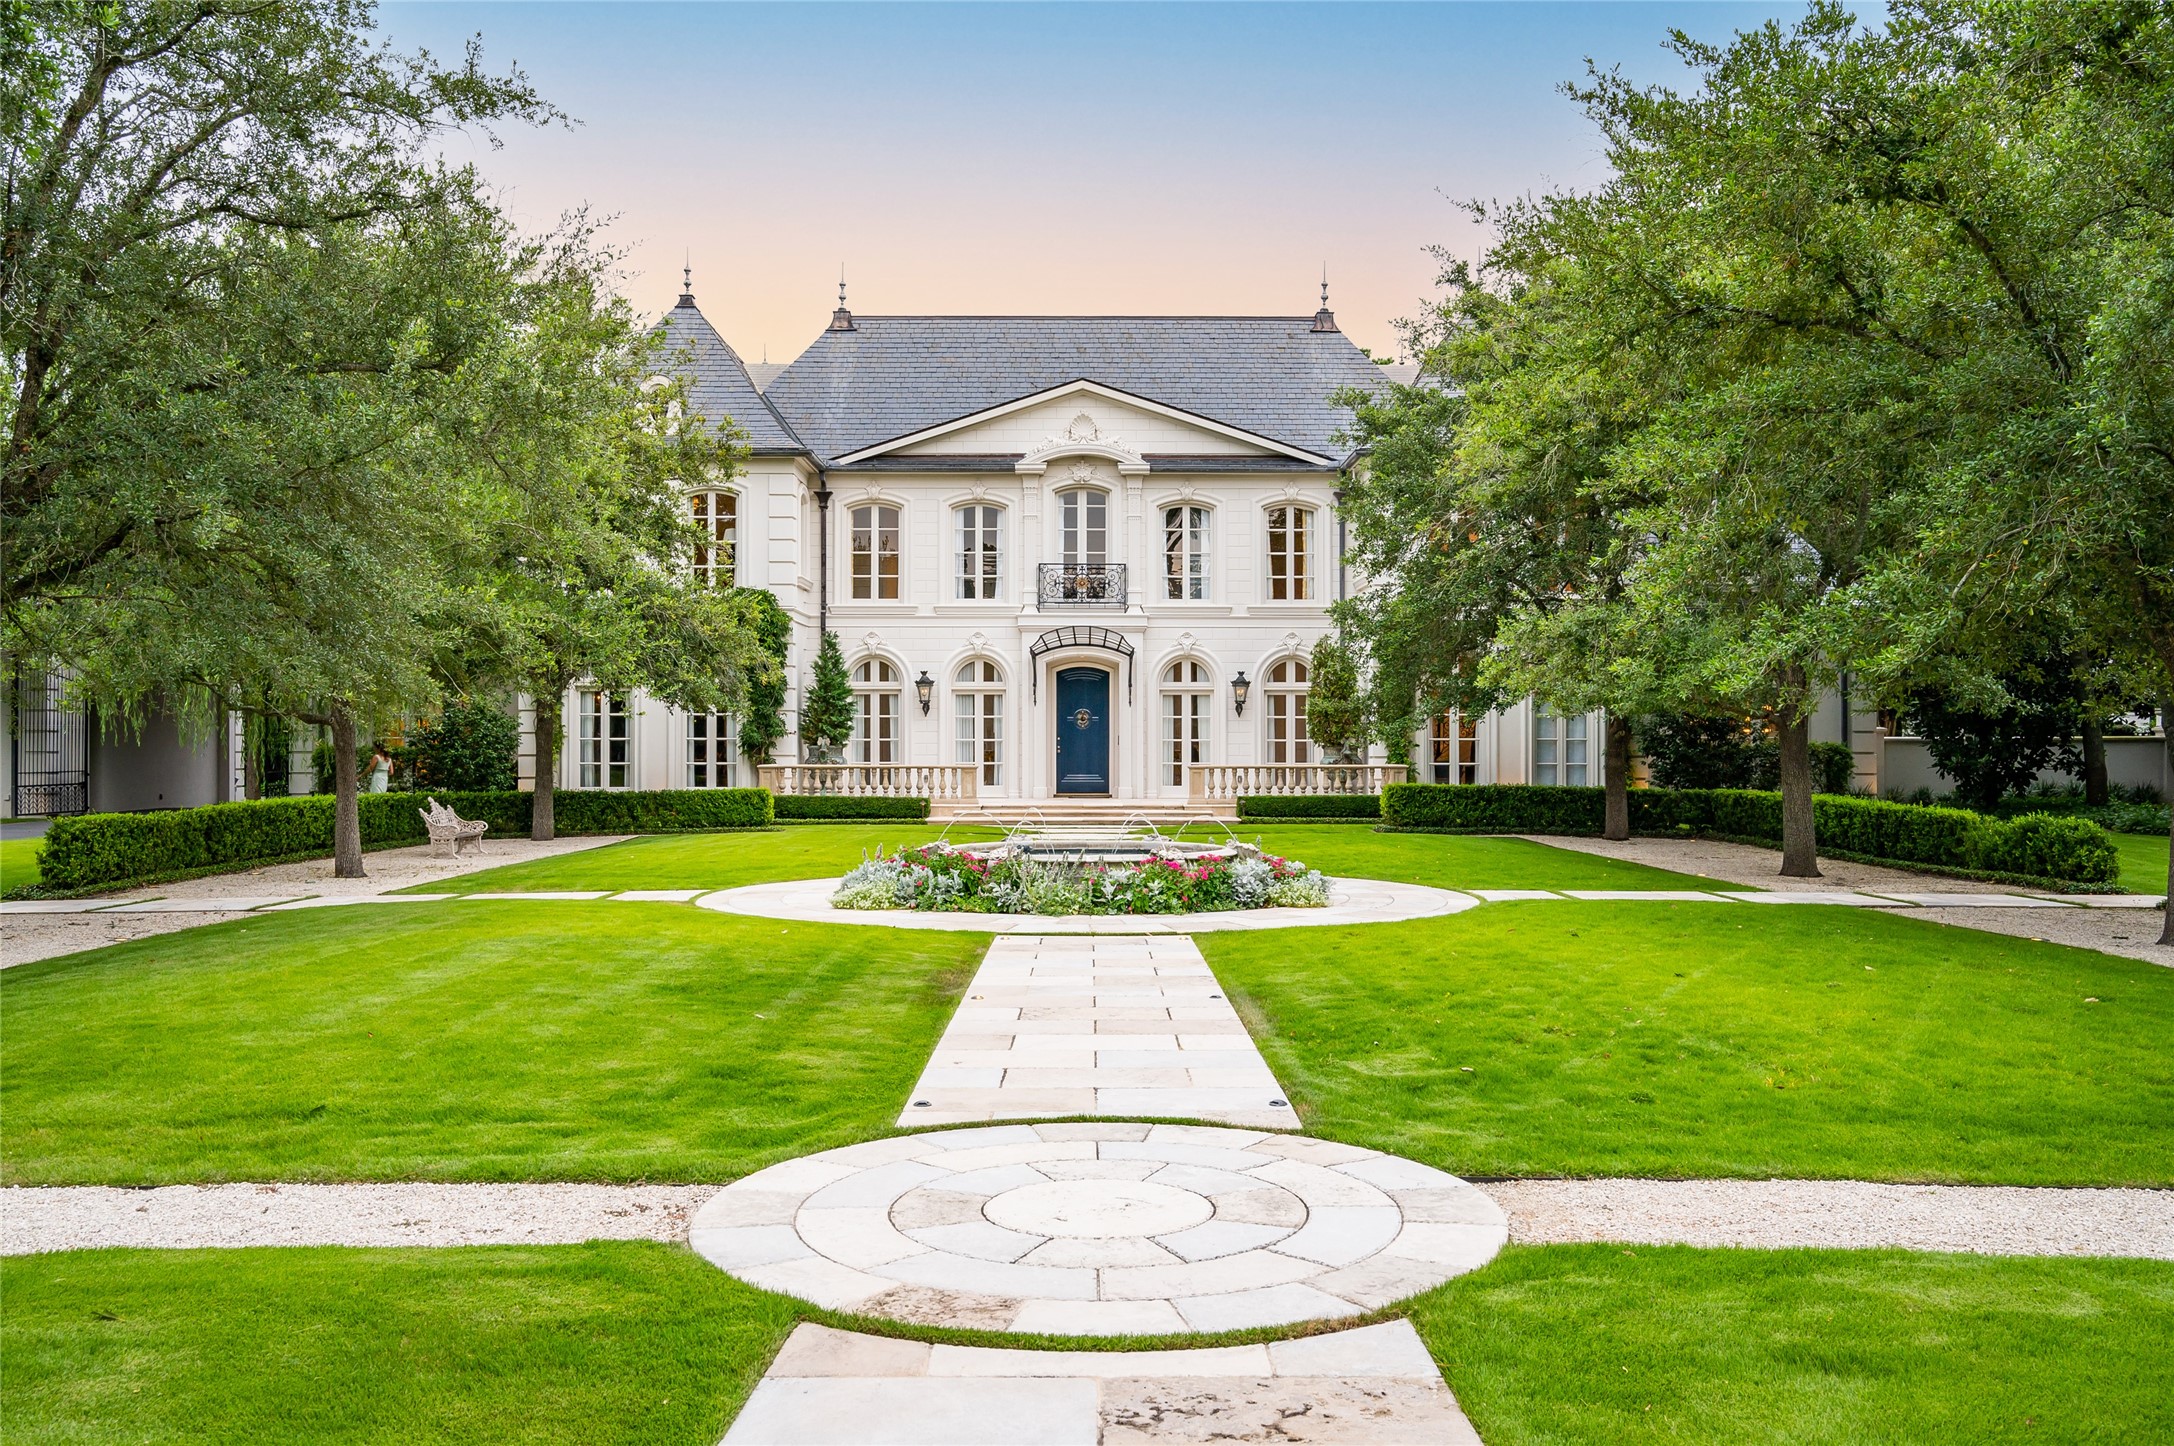 Reminscent of a Parisian garden, this perfectly manicured lawn is absolutely breathtaking.